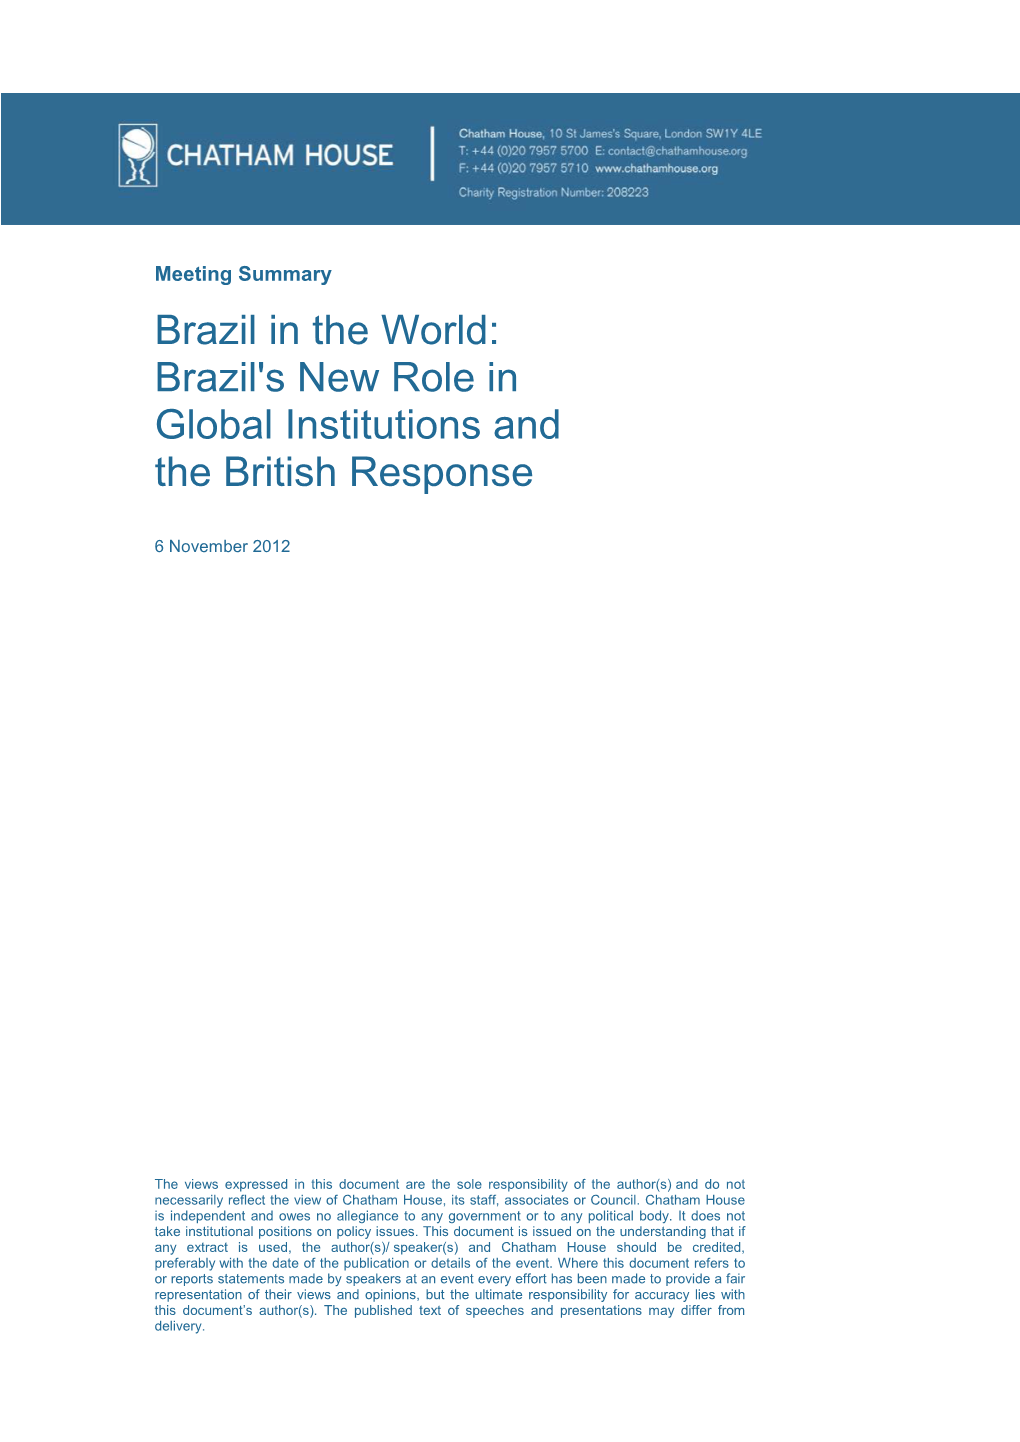 Brazil in the World: Brazil's New Role in Global Institutions and the British Response